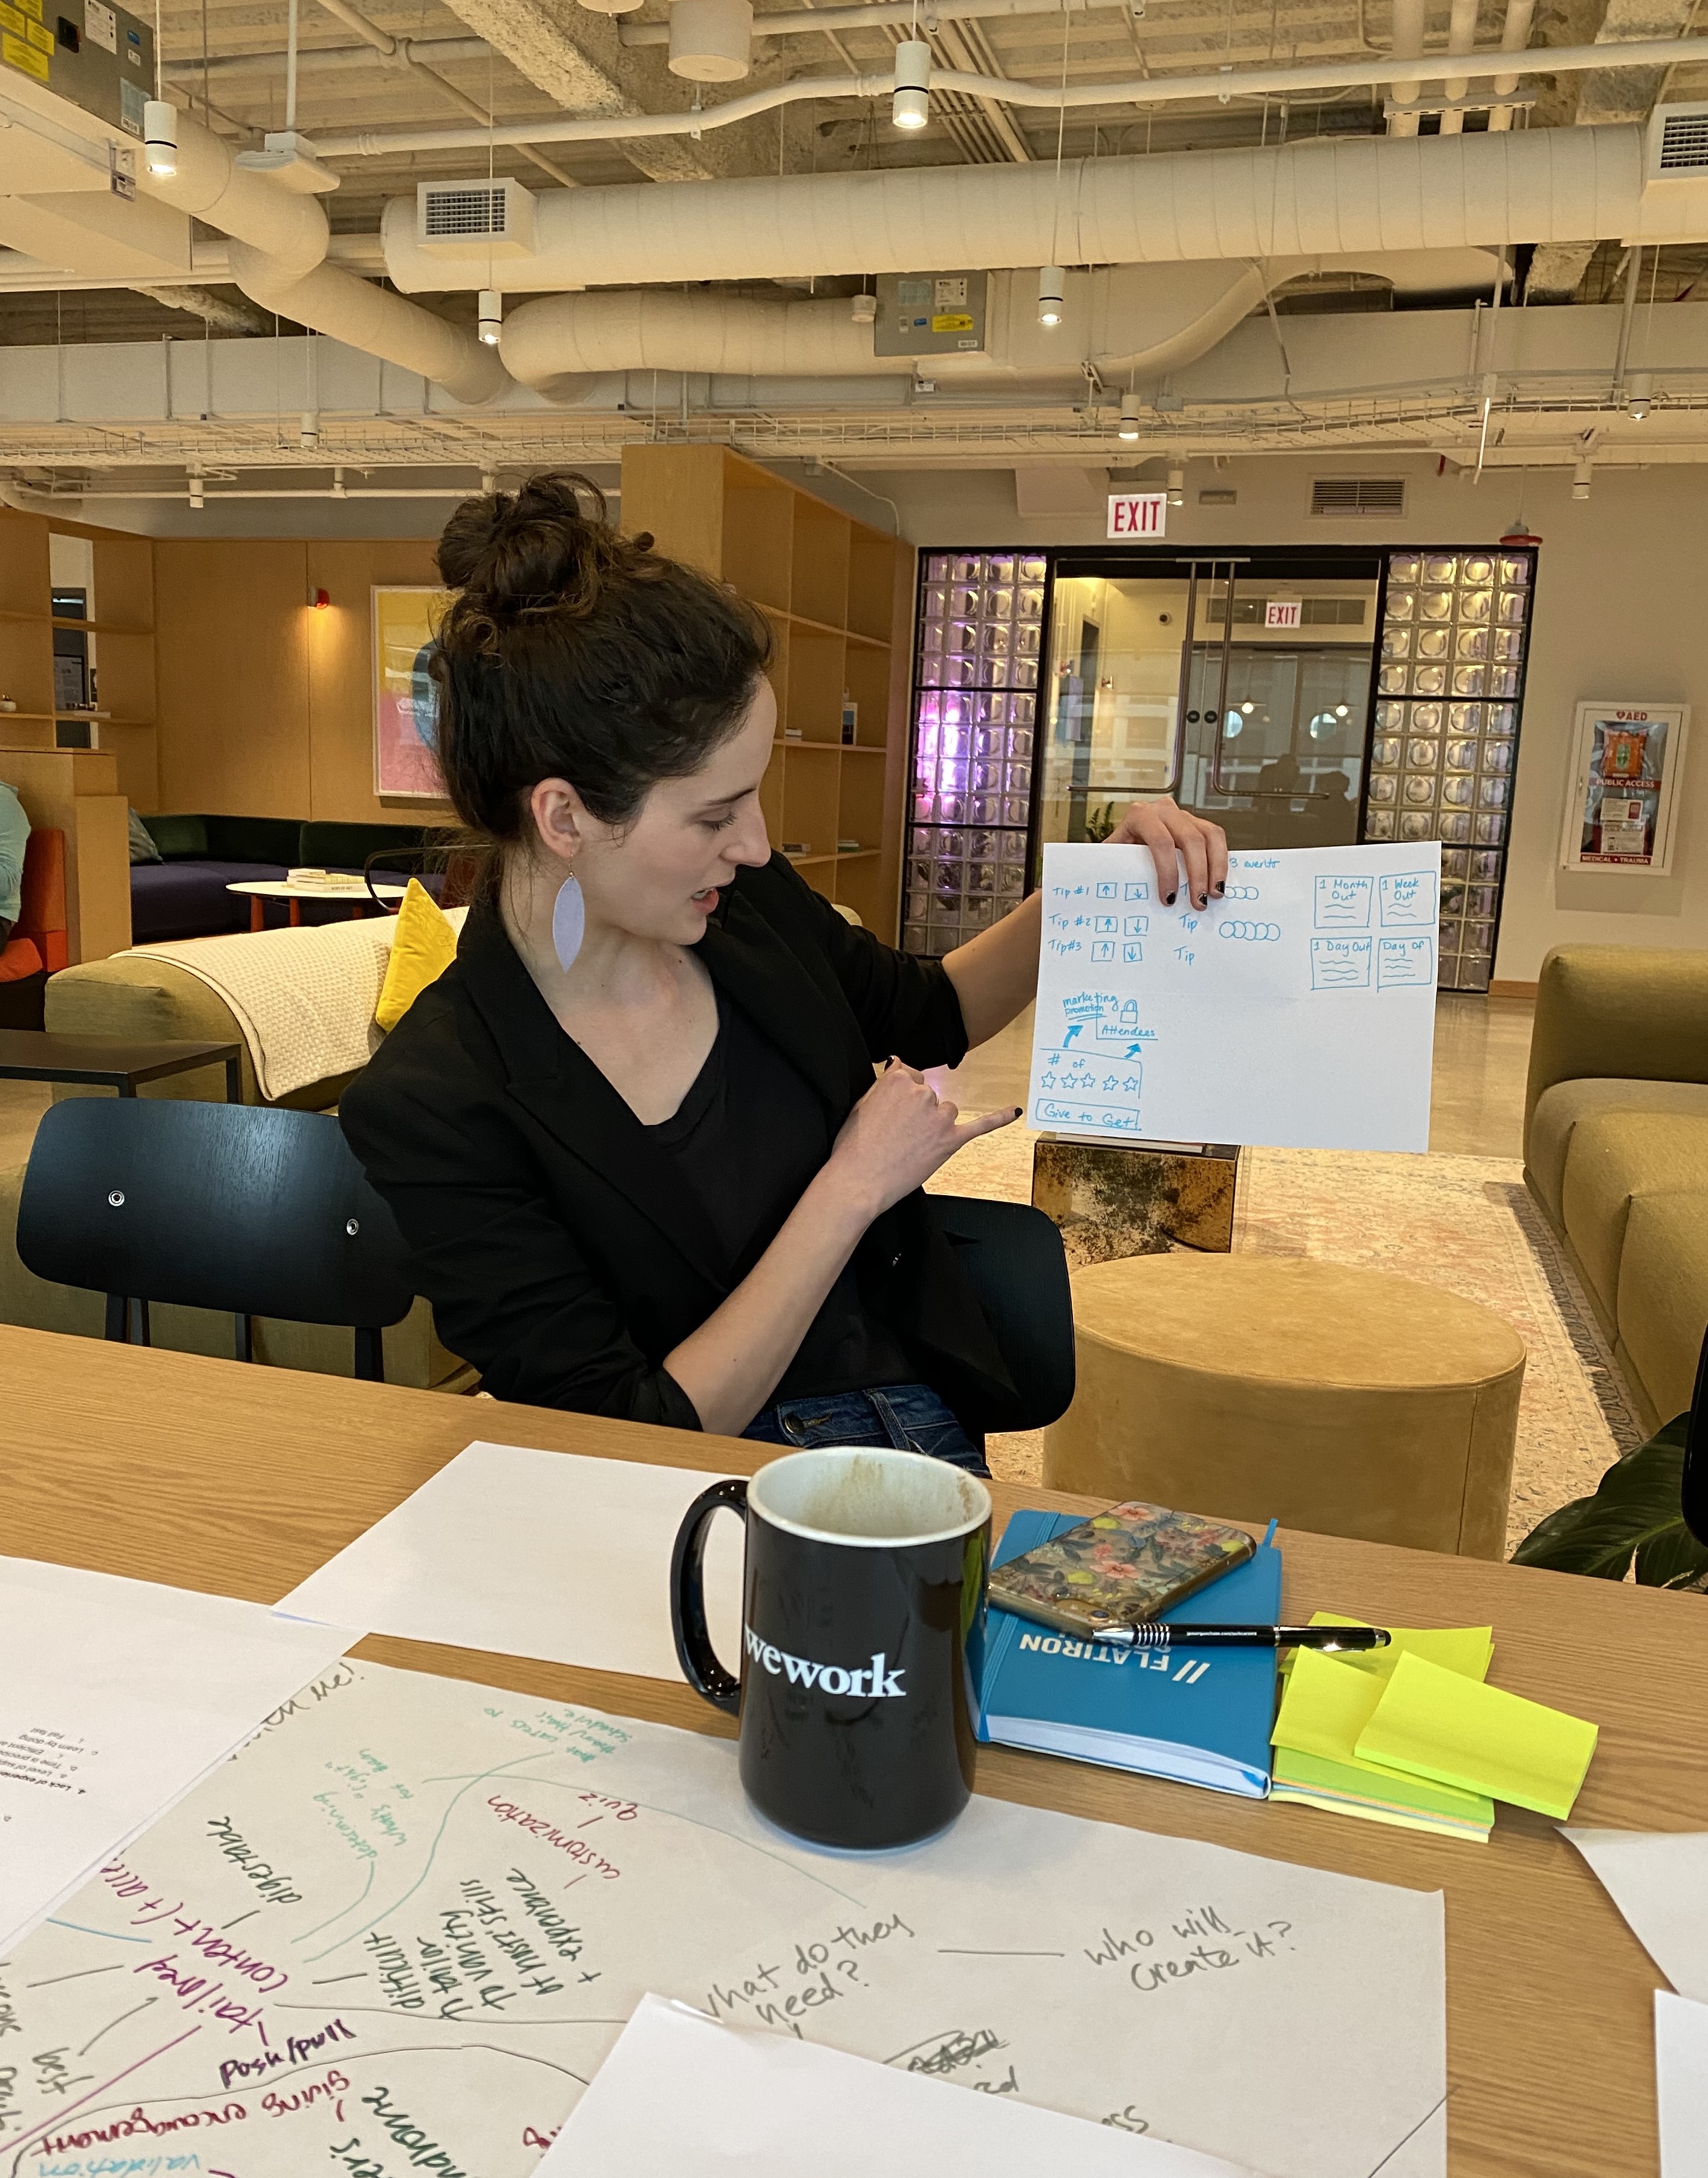 Image of the author holding up a sketch while talking through it. There's a table in the foreground, littered with post-it notes, papers, markers, and coffee cups.